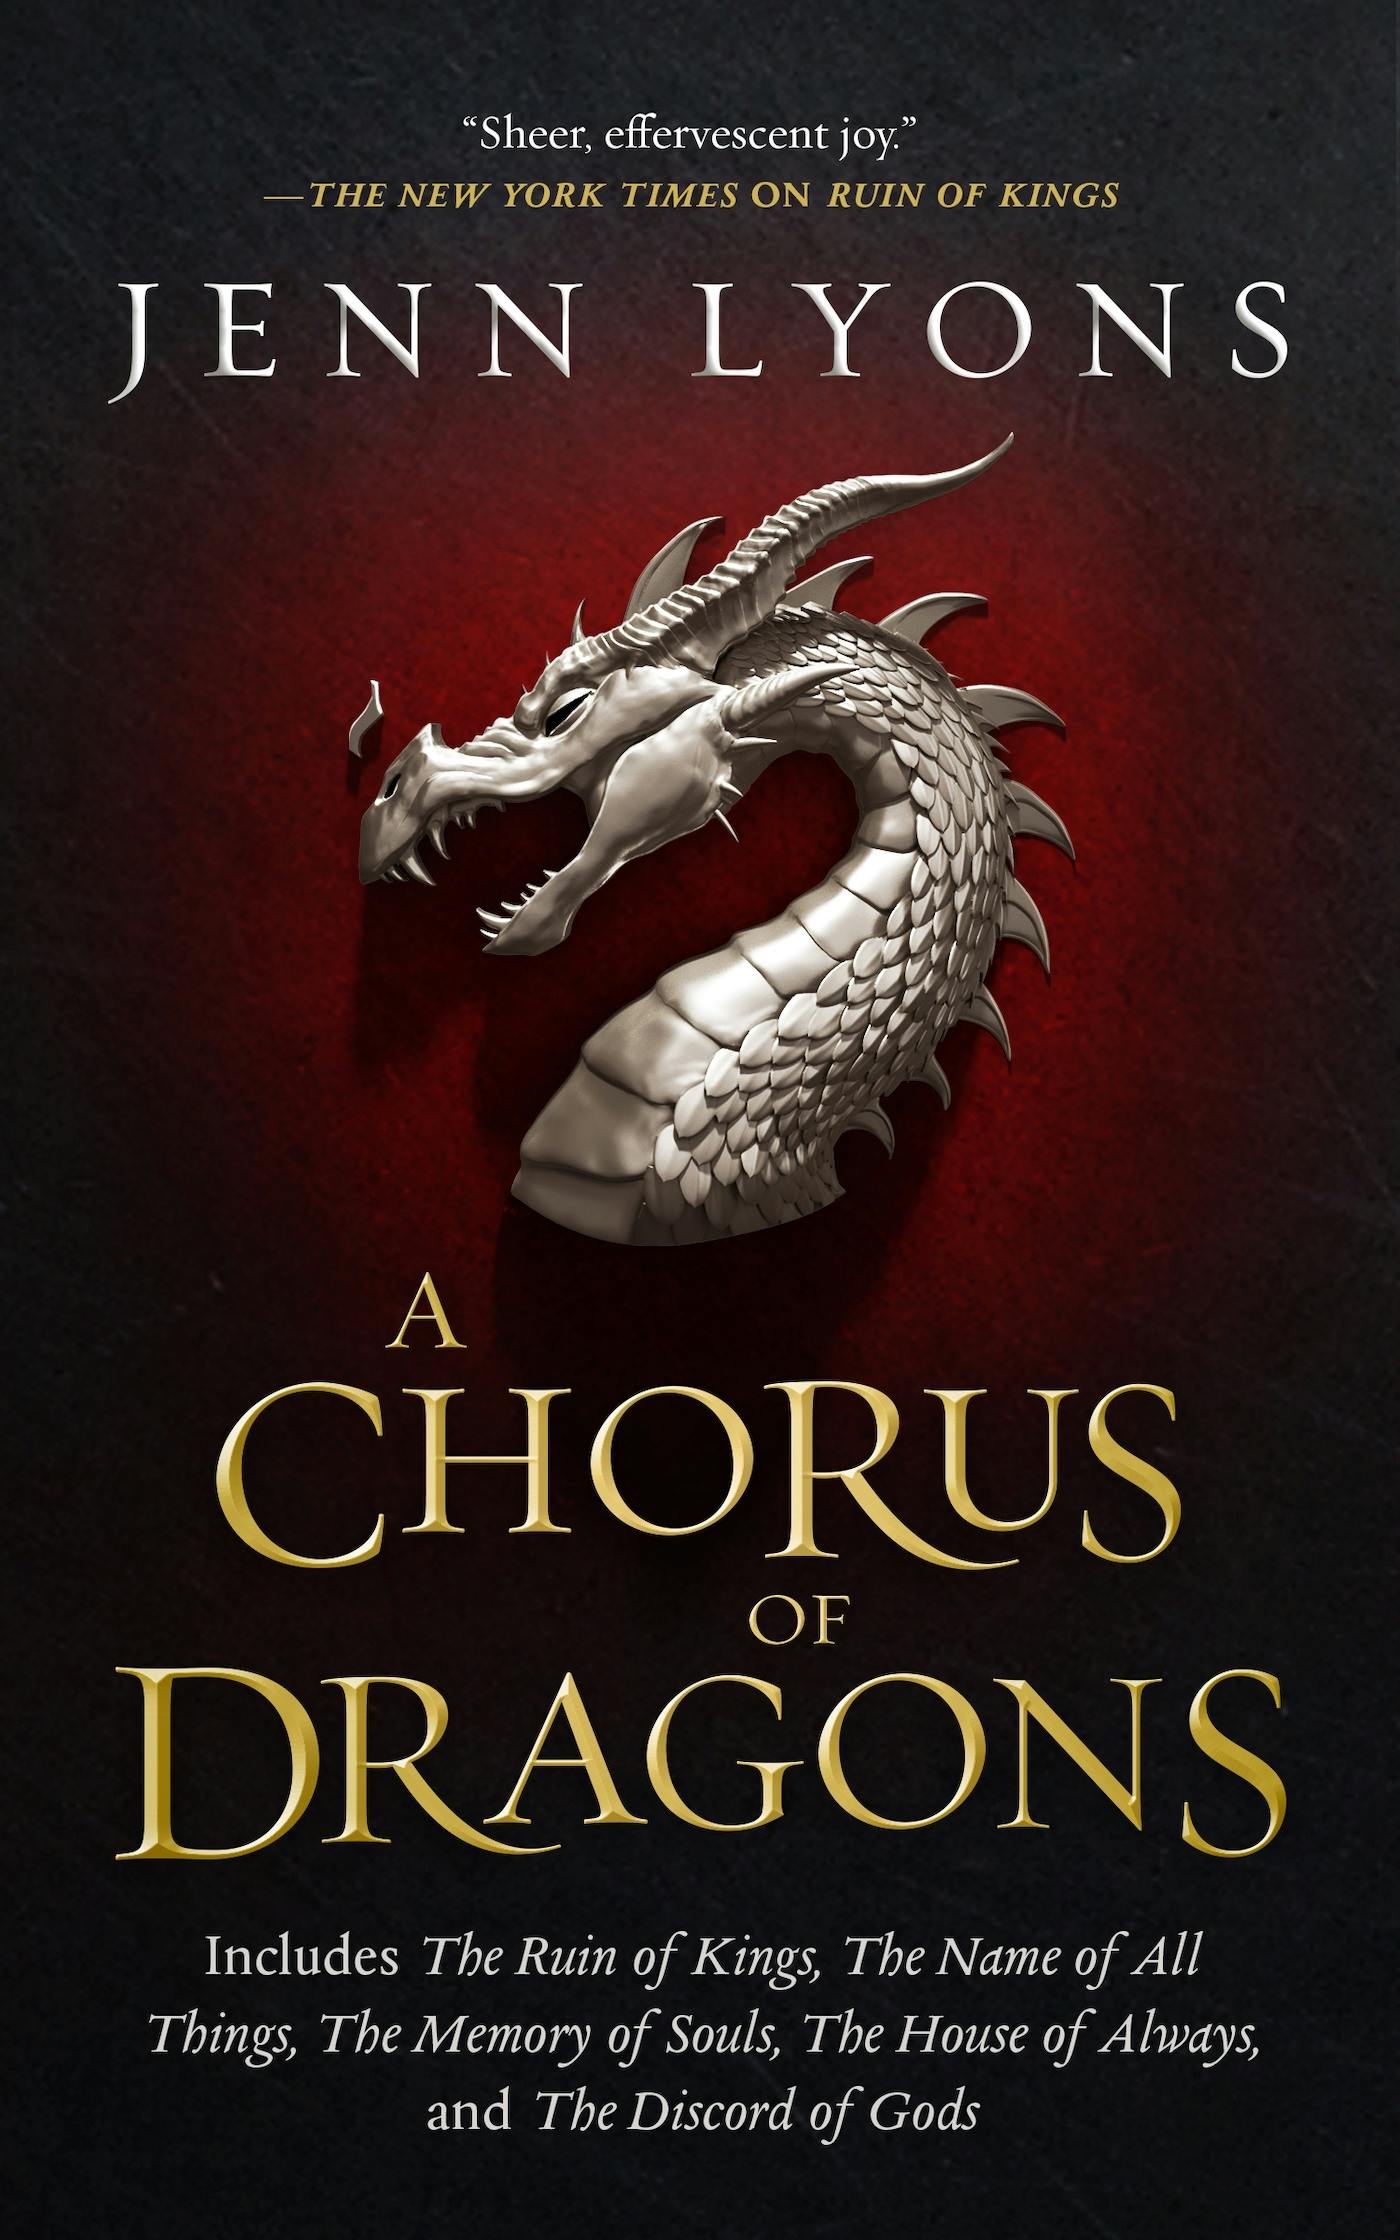 Cover for the book titled as: A Chorus of Dragons